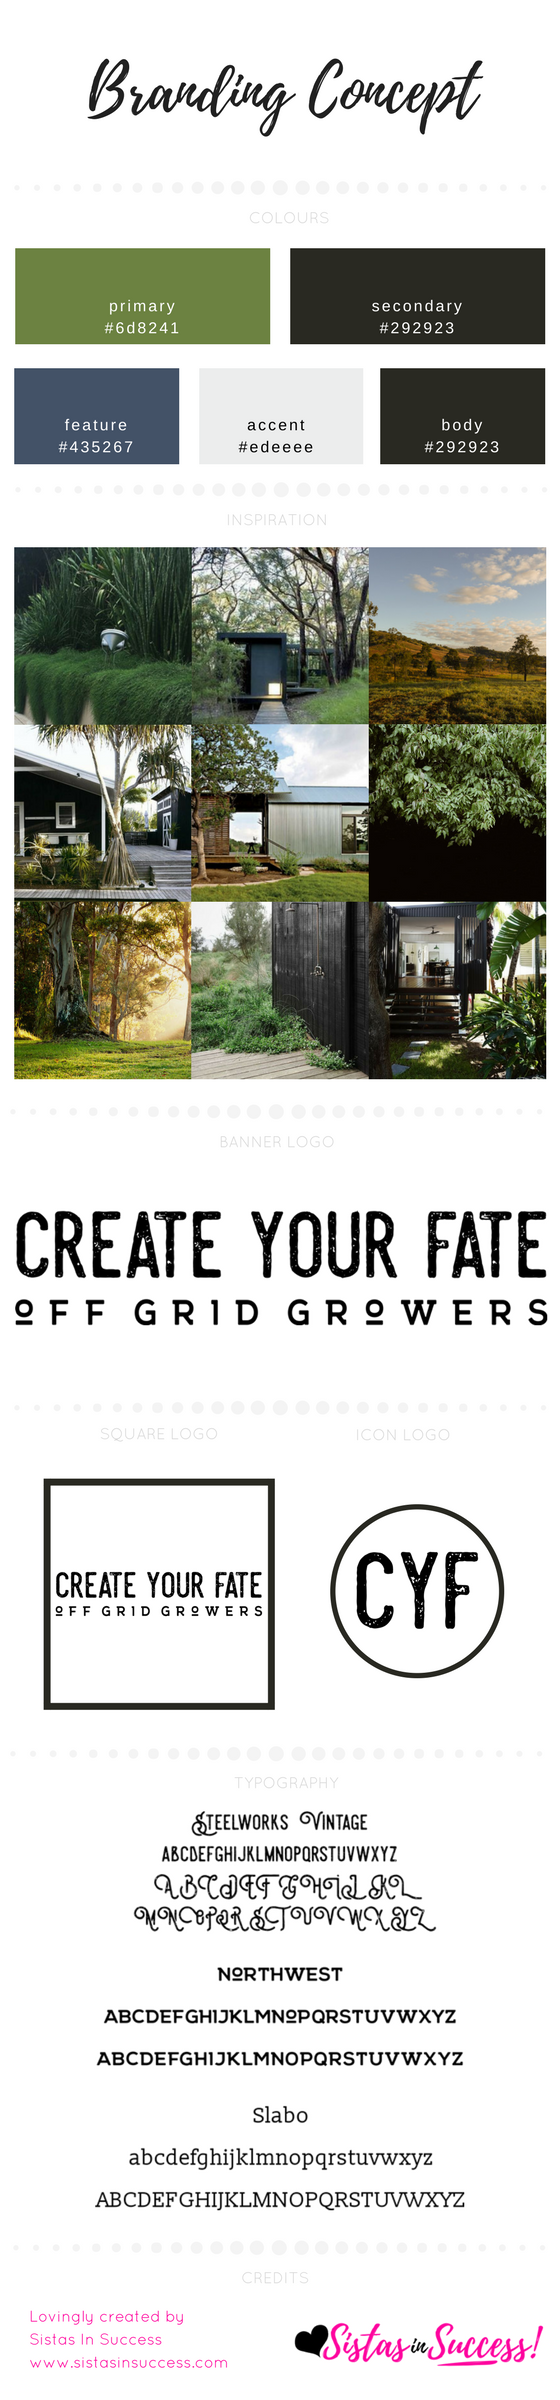 Create Your Fate Collective Group Branding Concept